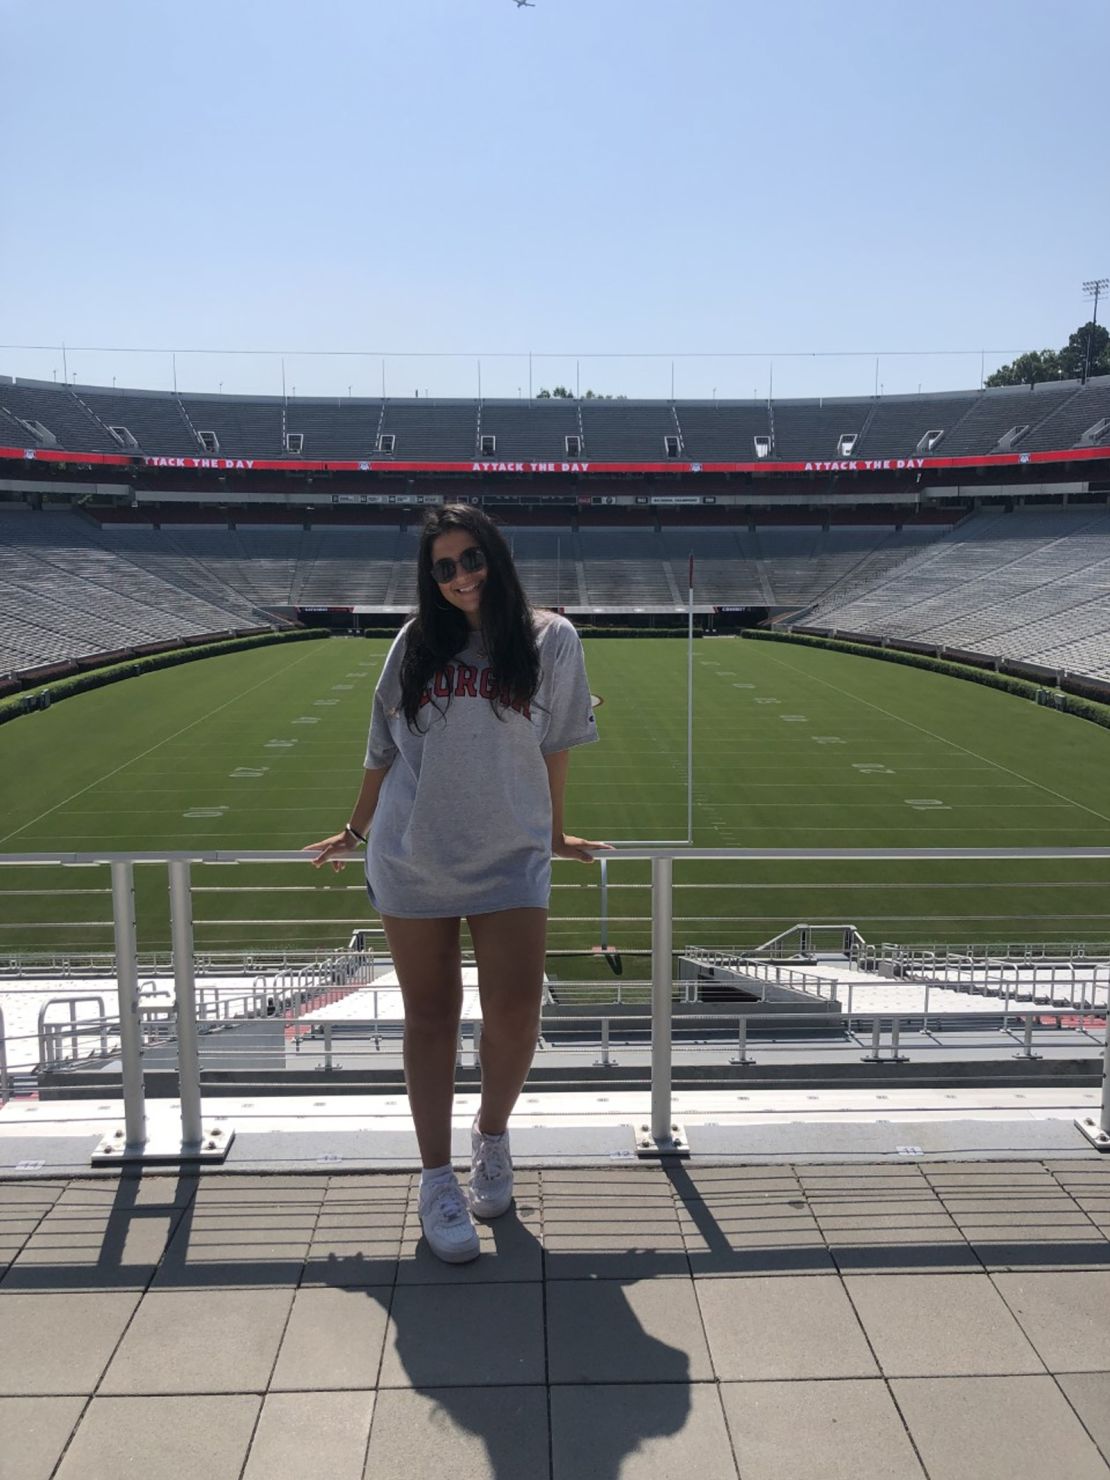 Dania Kalaji, a junior at UGA, is seen at Sanford Stadium in 2020 before a game against Auburn. Kalaji, who is vaccinated, plans to attend games this season.